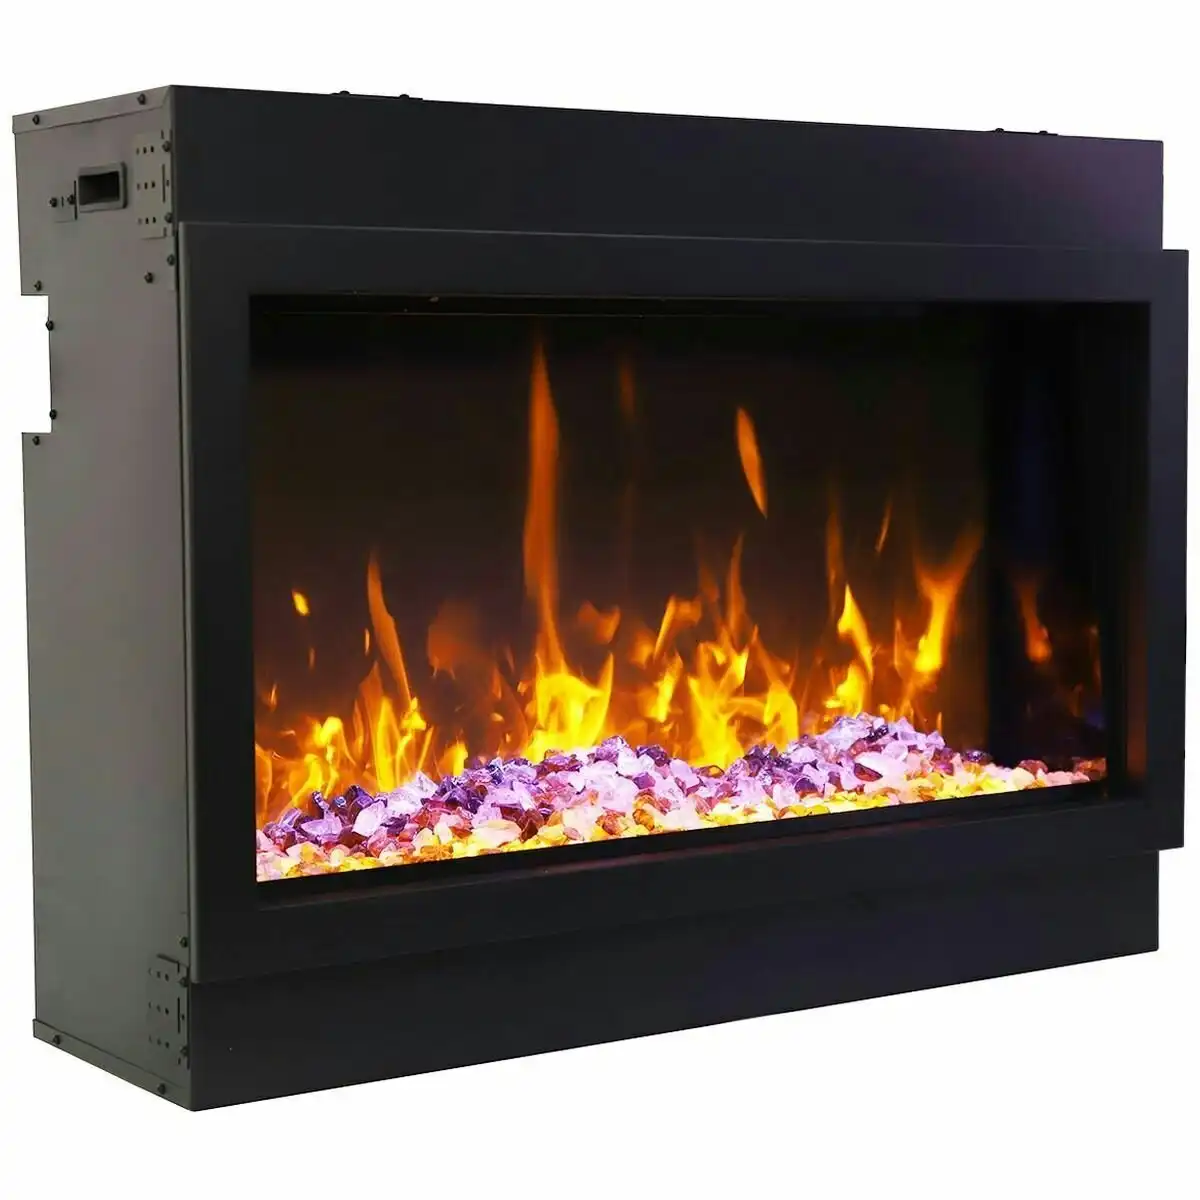 Remii 55 Inch Extra Tall Indoor Built-in Electric Fireplace with Black Steel Surround